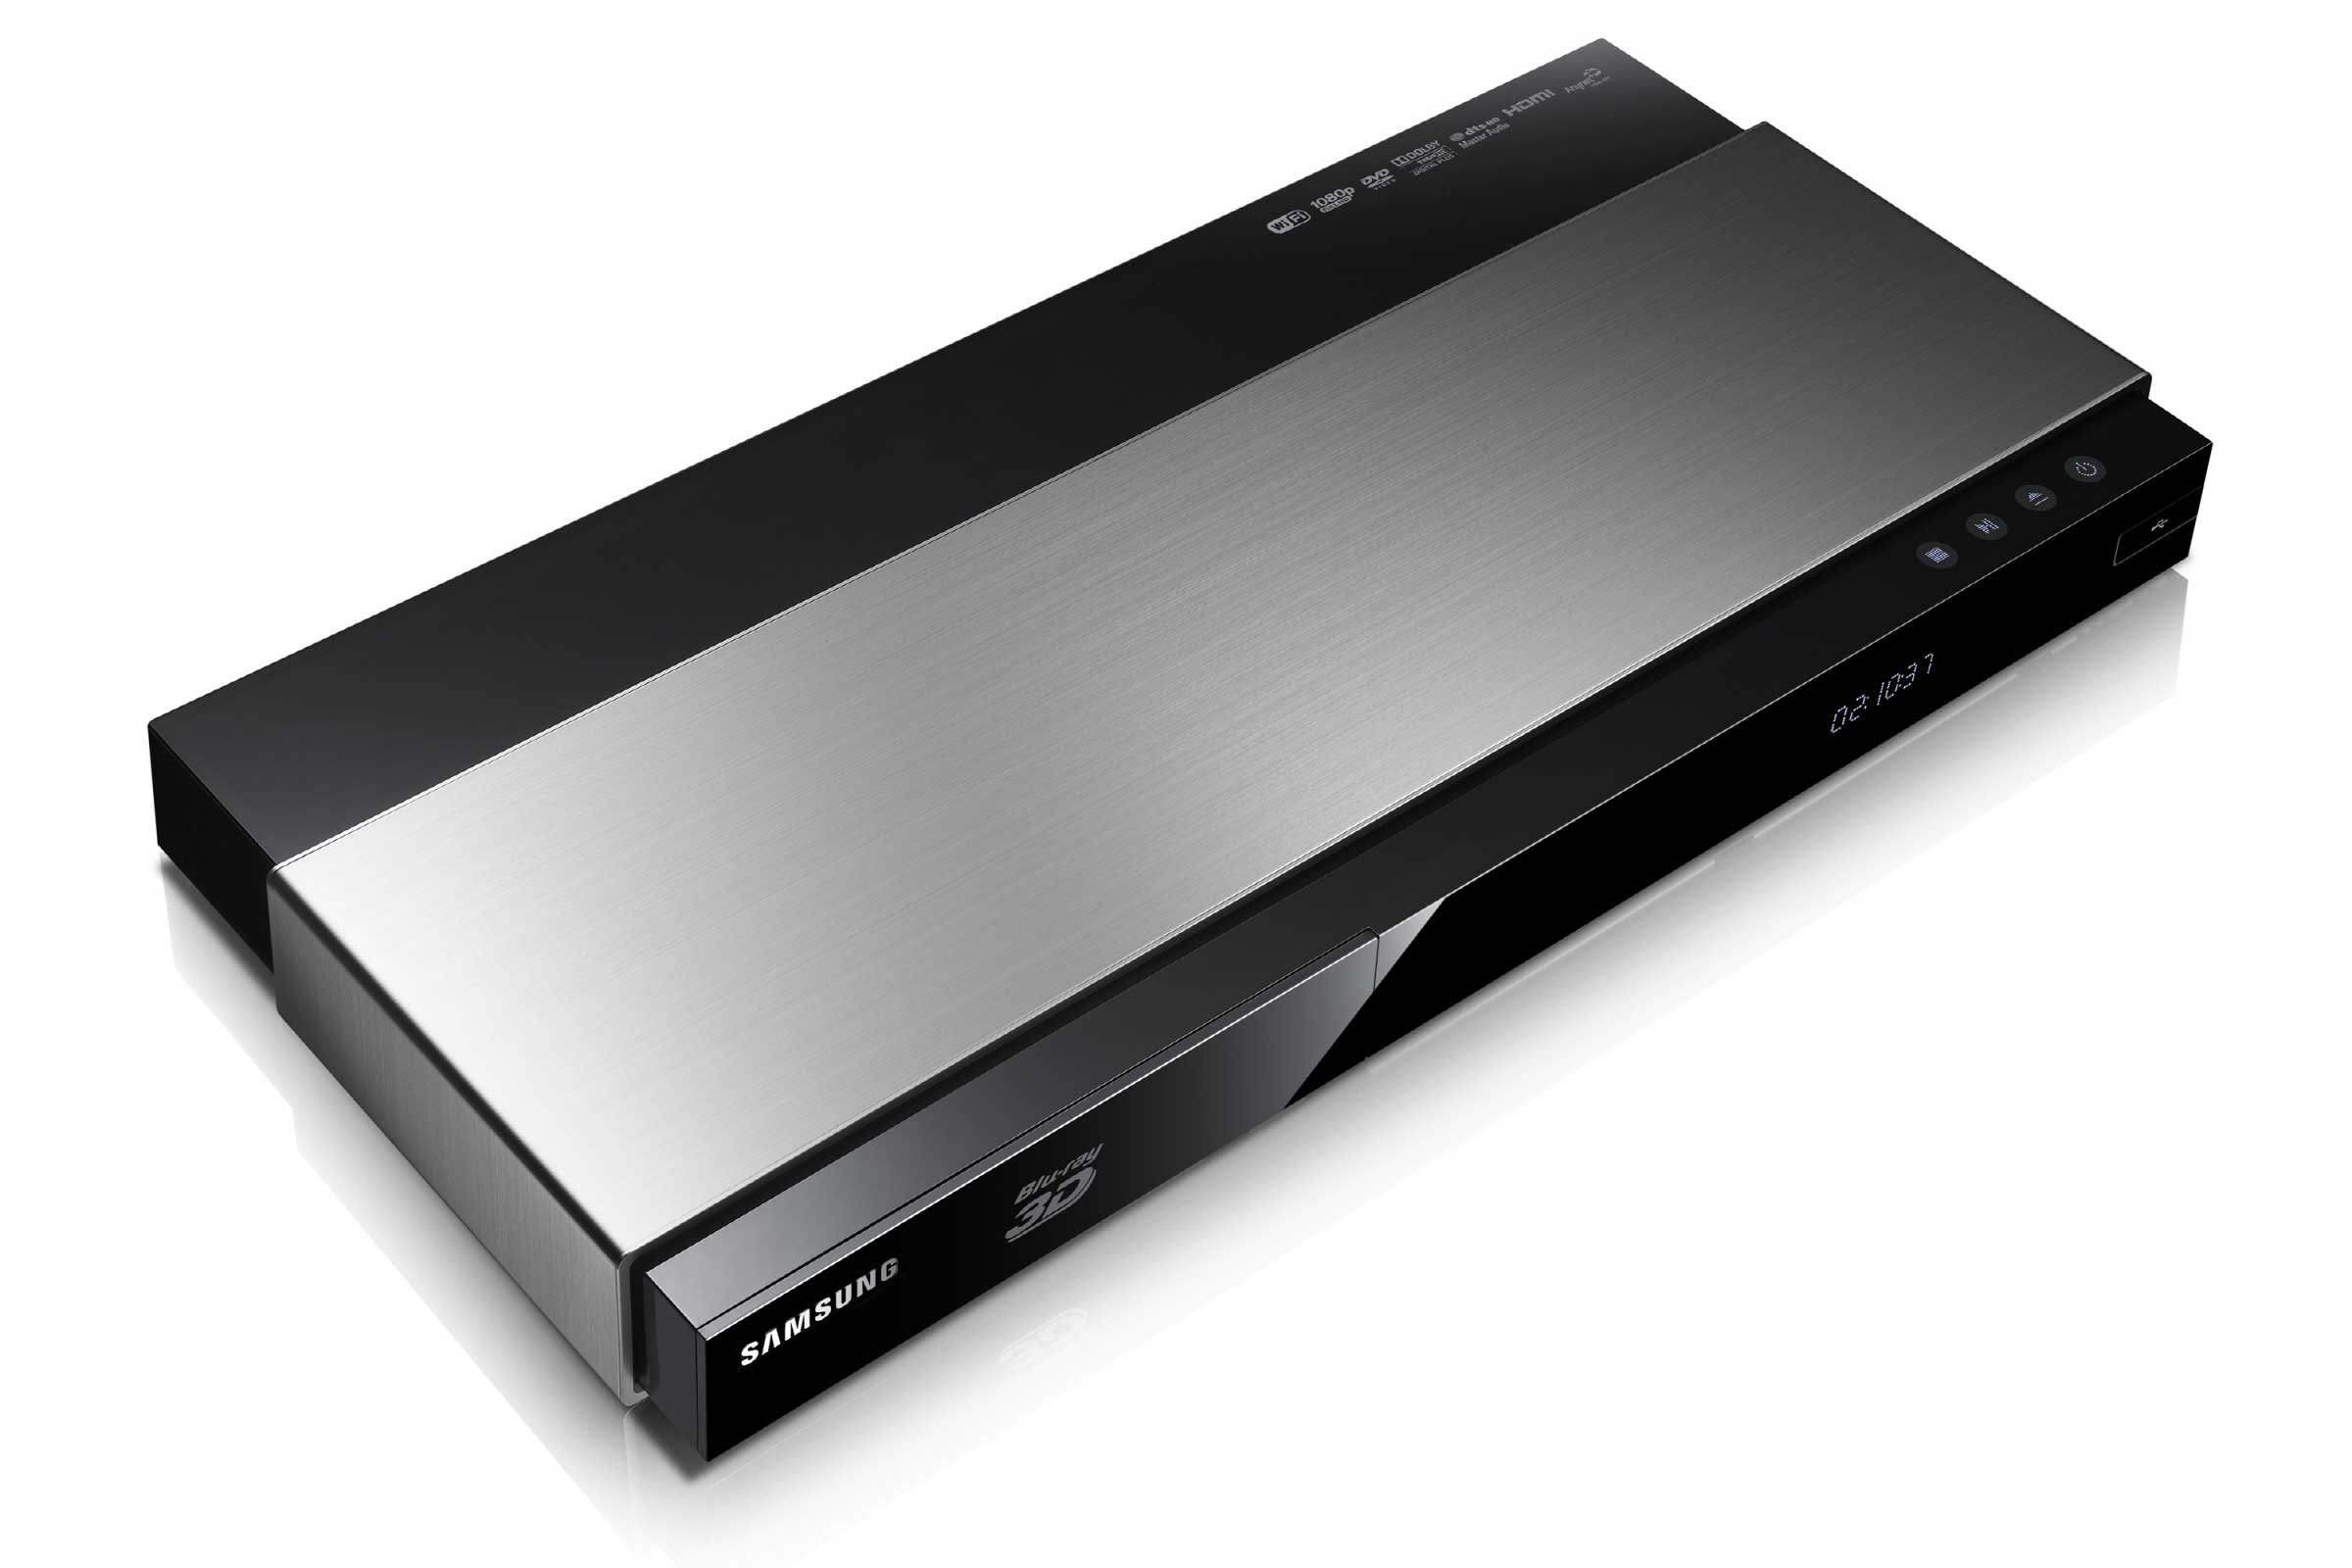 CES 2013: Samsung zeigt BD-F7500 Blu-Ray-Player mit Ultra-HD-Upscaling